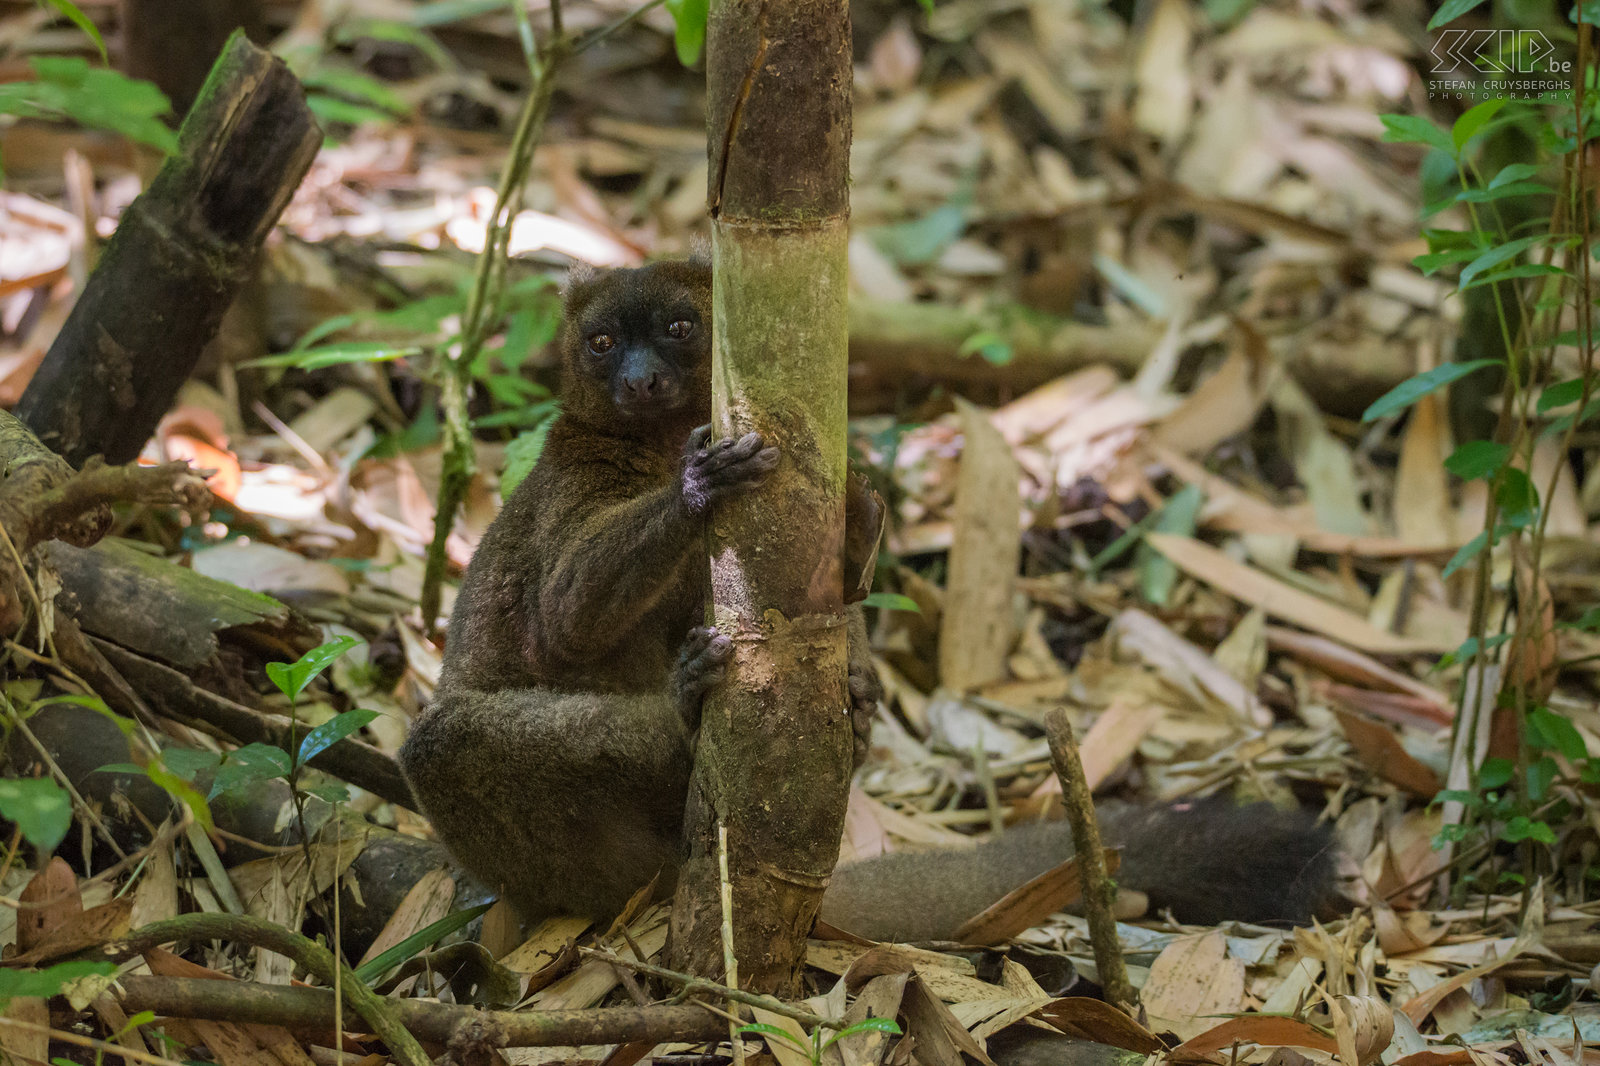 Ranomafana - Greater bamboo lemur The greater bamboo lemur (Prolemur simus) is the largest bamboo lemur and one of the world's most critically endangered primates. They live in groups up to 28 individuals and only feed on bamboo leaves and shoots. Stefan Cruysberghs